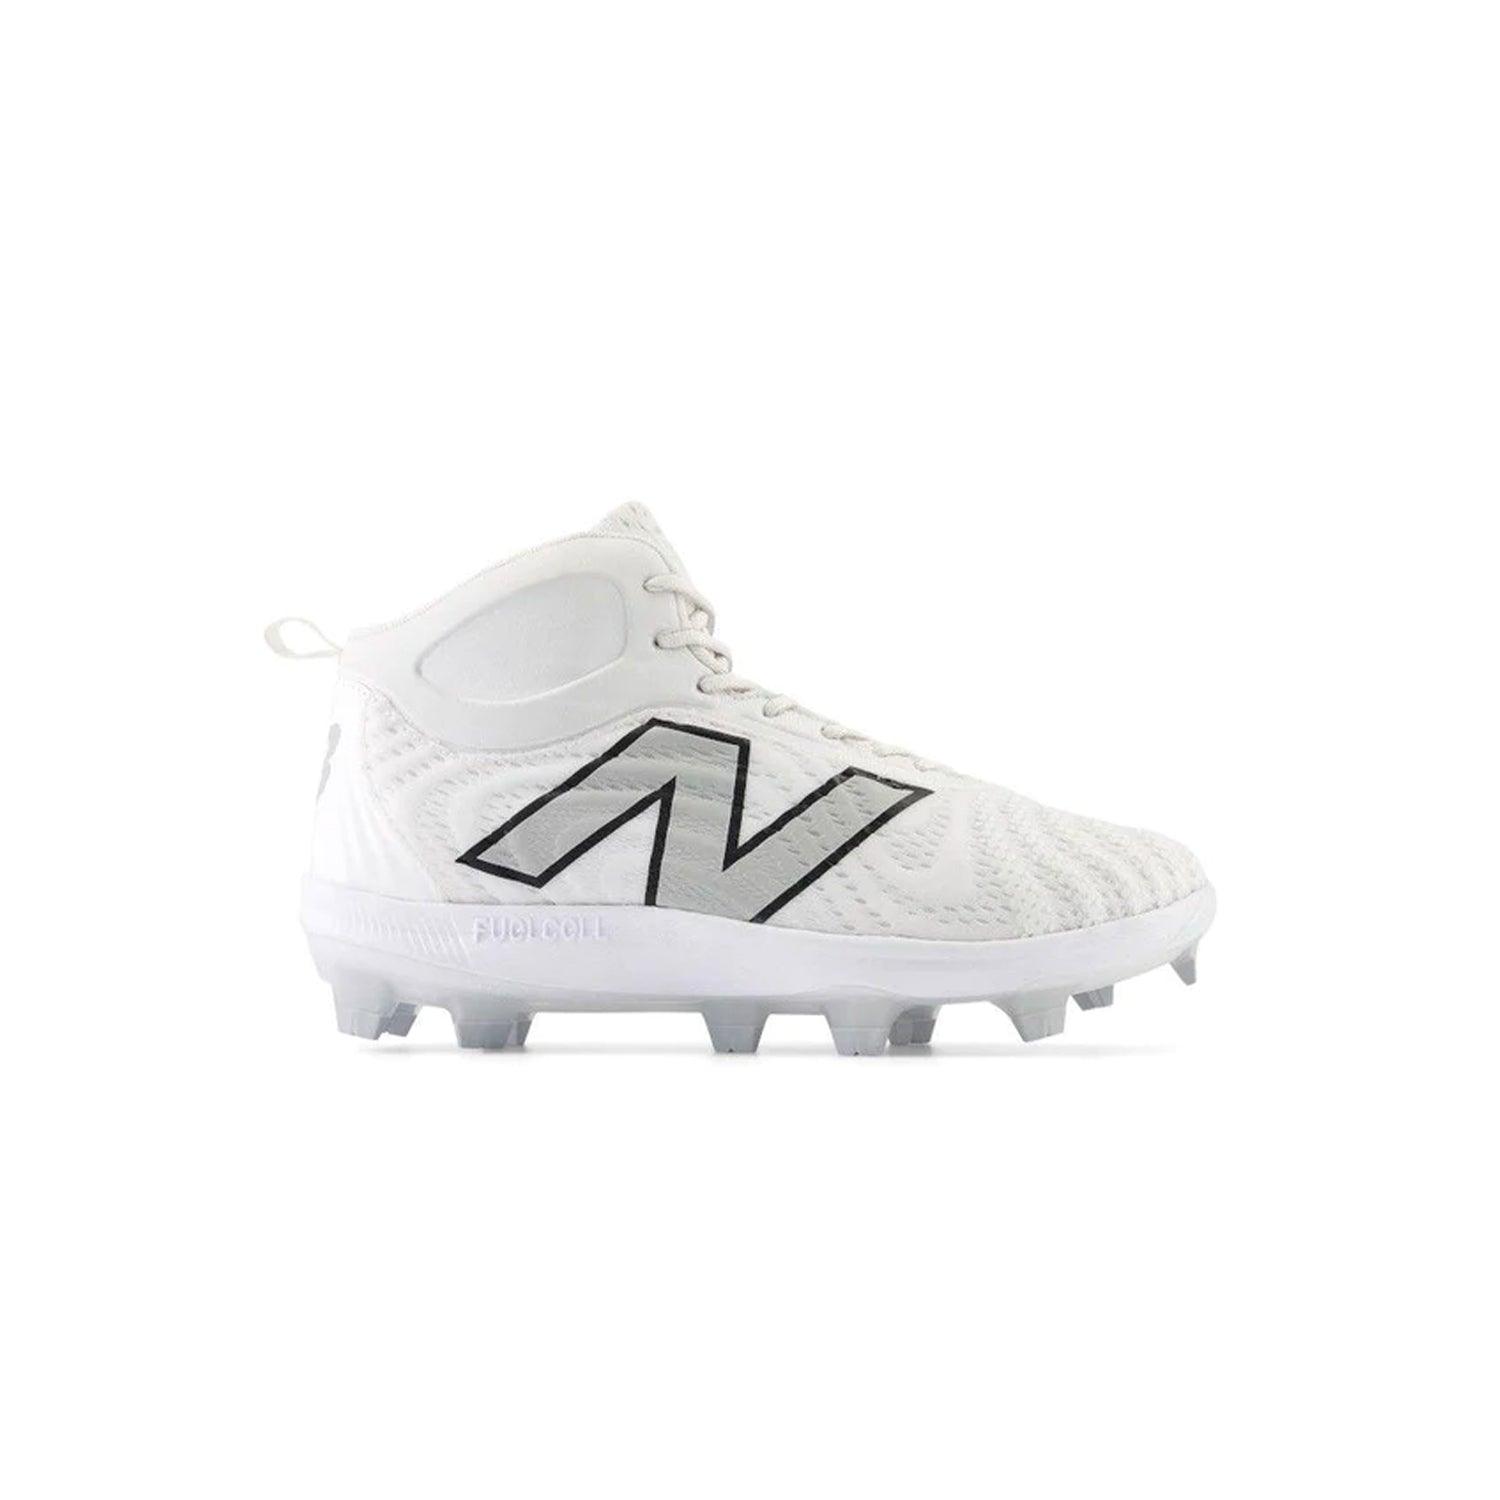 New Balance Men's FuelCell 4040 V7 Mid-Molded Baseball Cleats - White / Raincloud - PM4040W7 - Smash It Sports